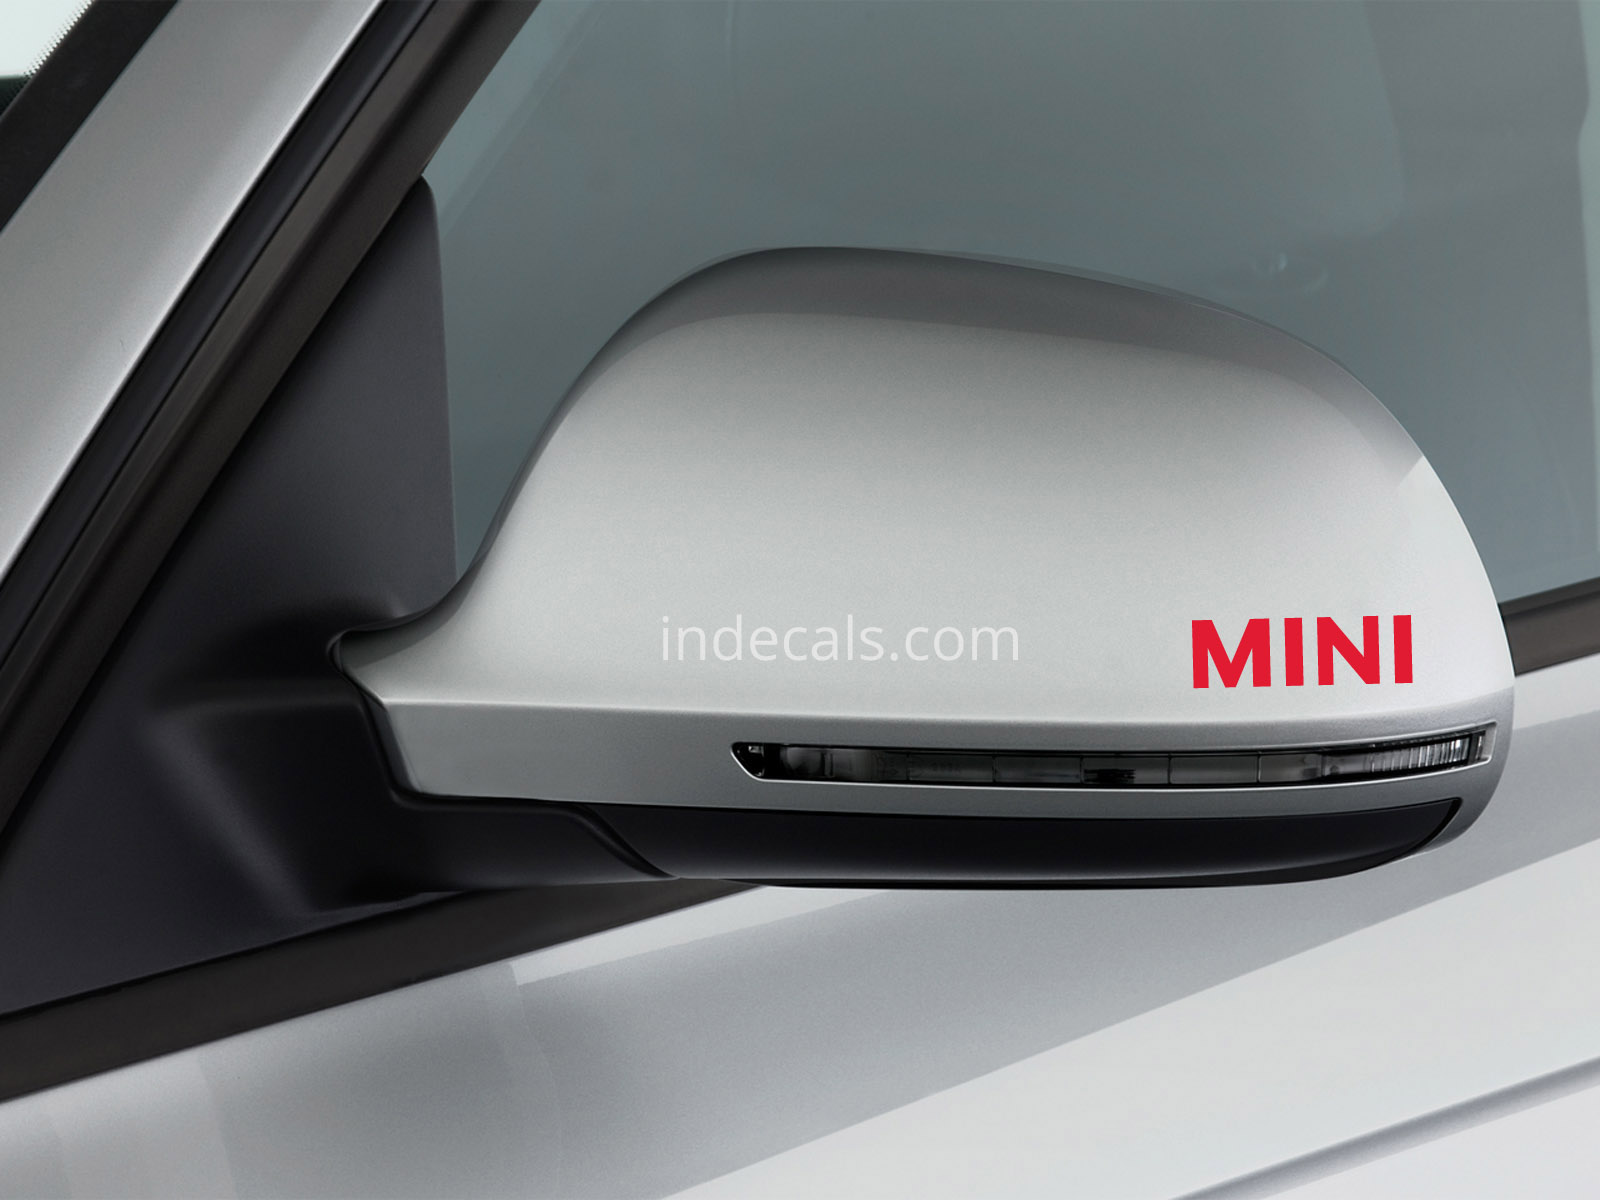 3 x Mini Stickers for Mirrors - Red